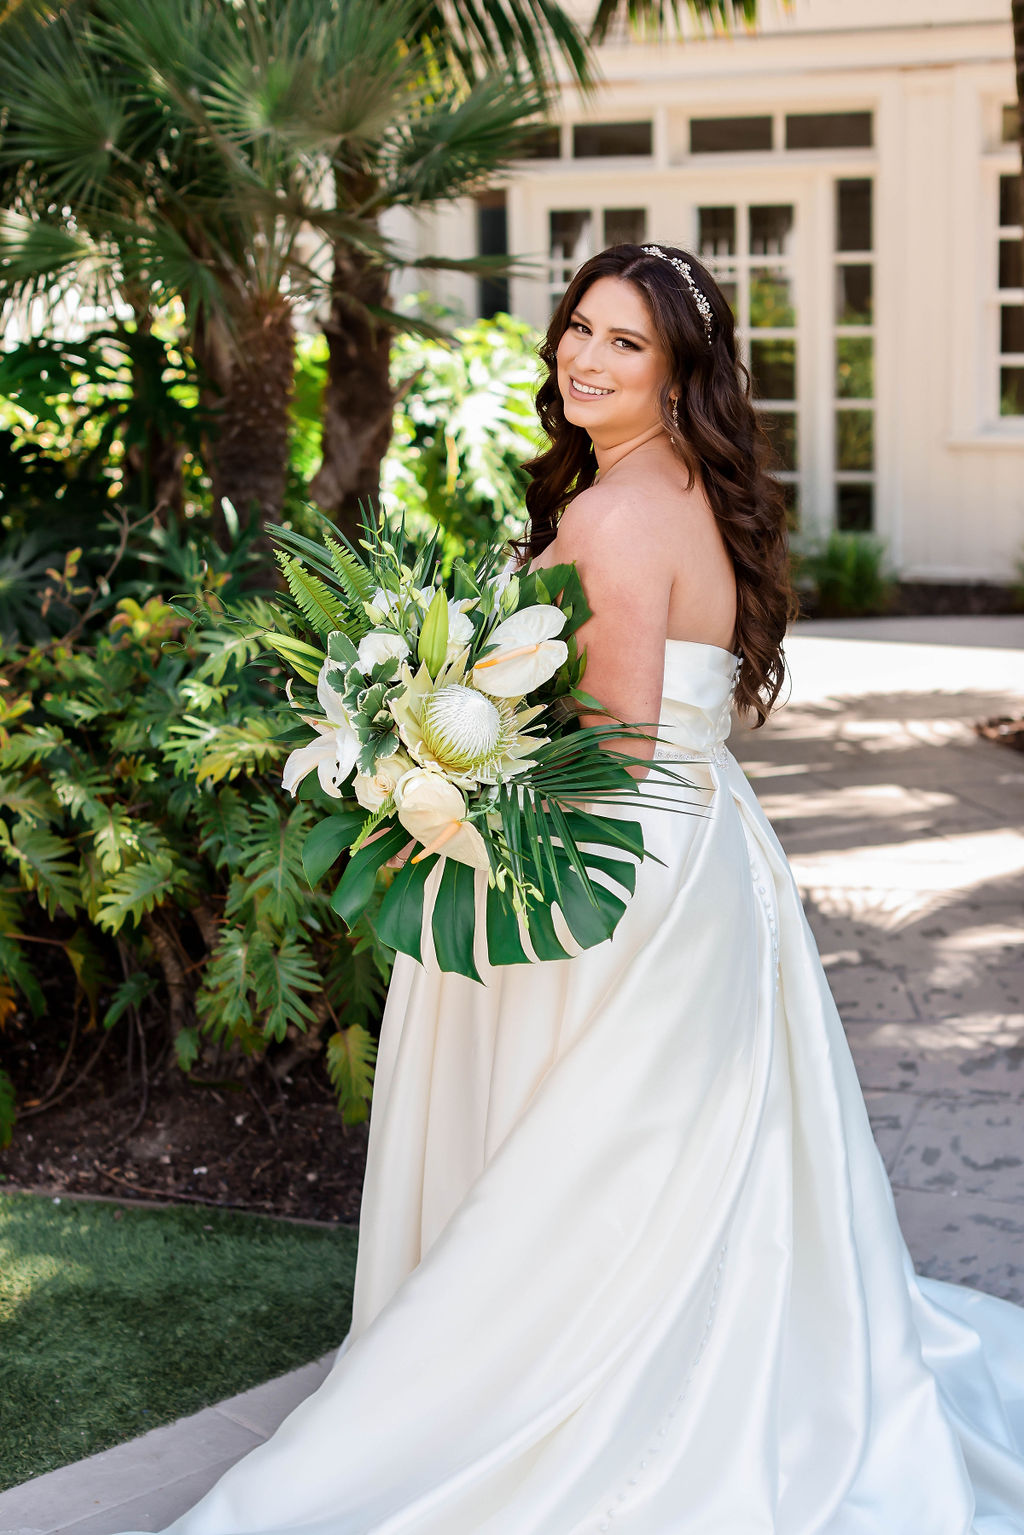 Closeup of the bride and her bouquet at The Hotel Del Coronado in San Diego. Standing outside surrounded by palm trees. Photo by Sarah Block Photography.